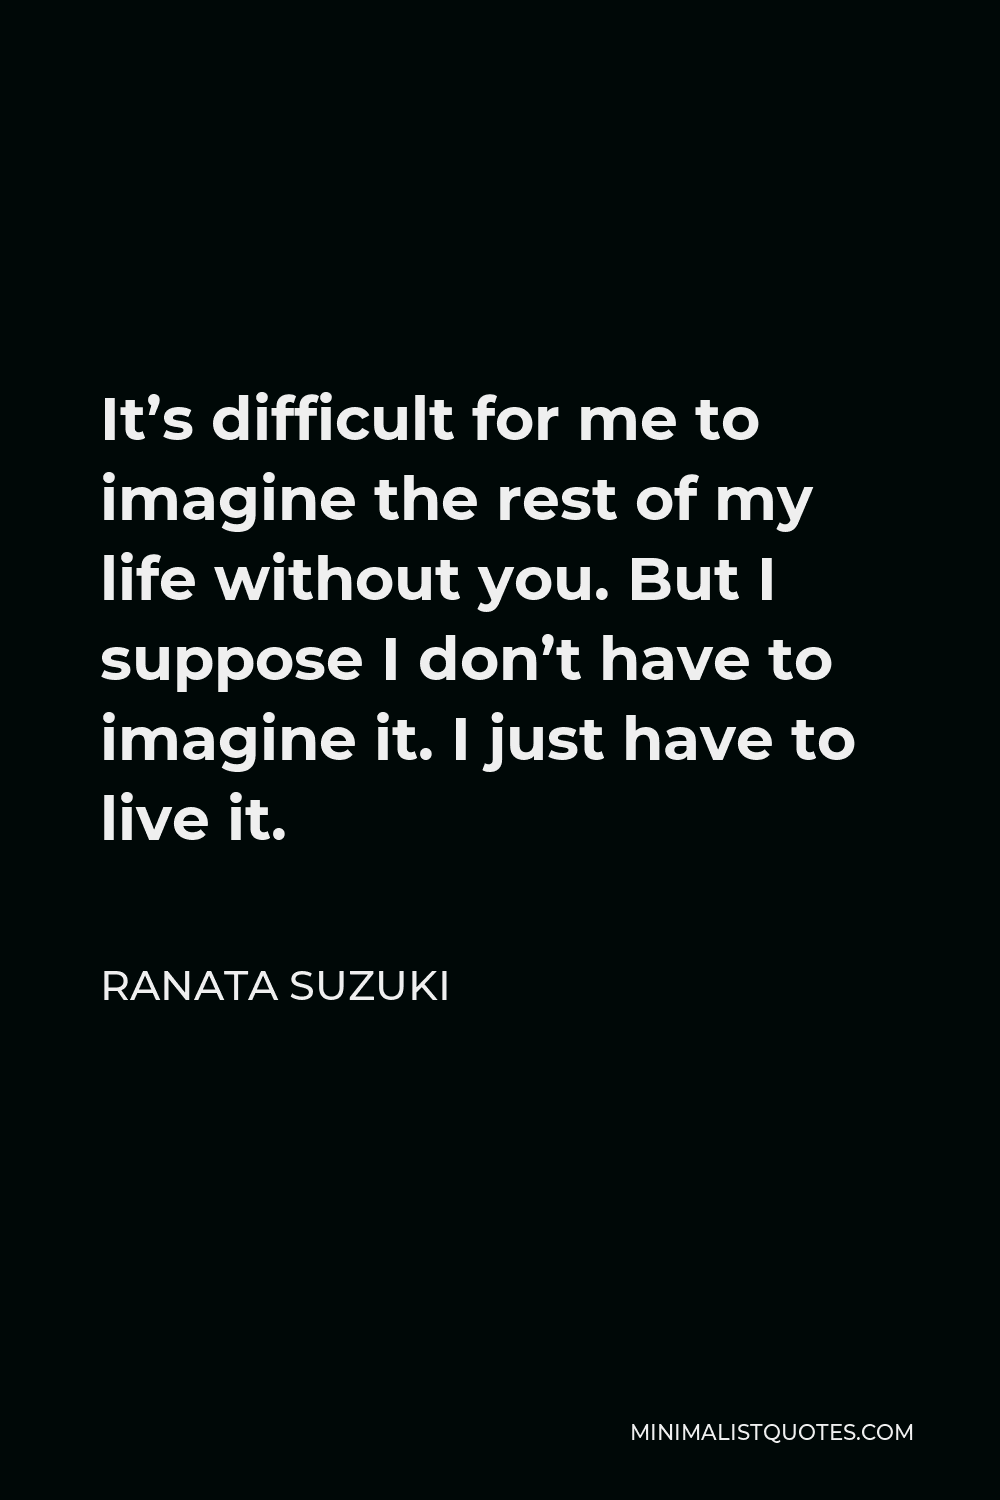 Ranata Suzuki Quote - It’s difficult for me to imagine the rest of my life without you. But I suppose I don’t have to imagine it. I just have to live it.